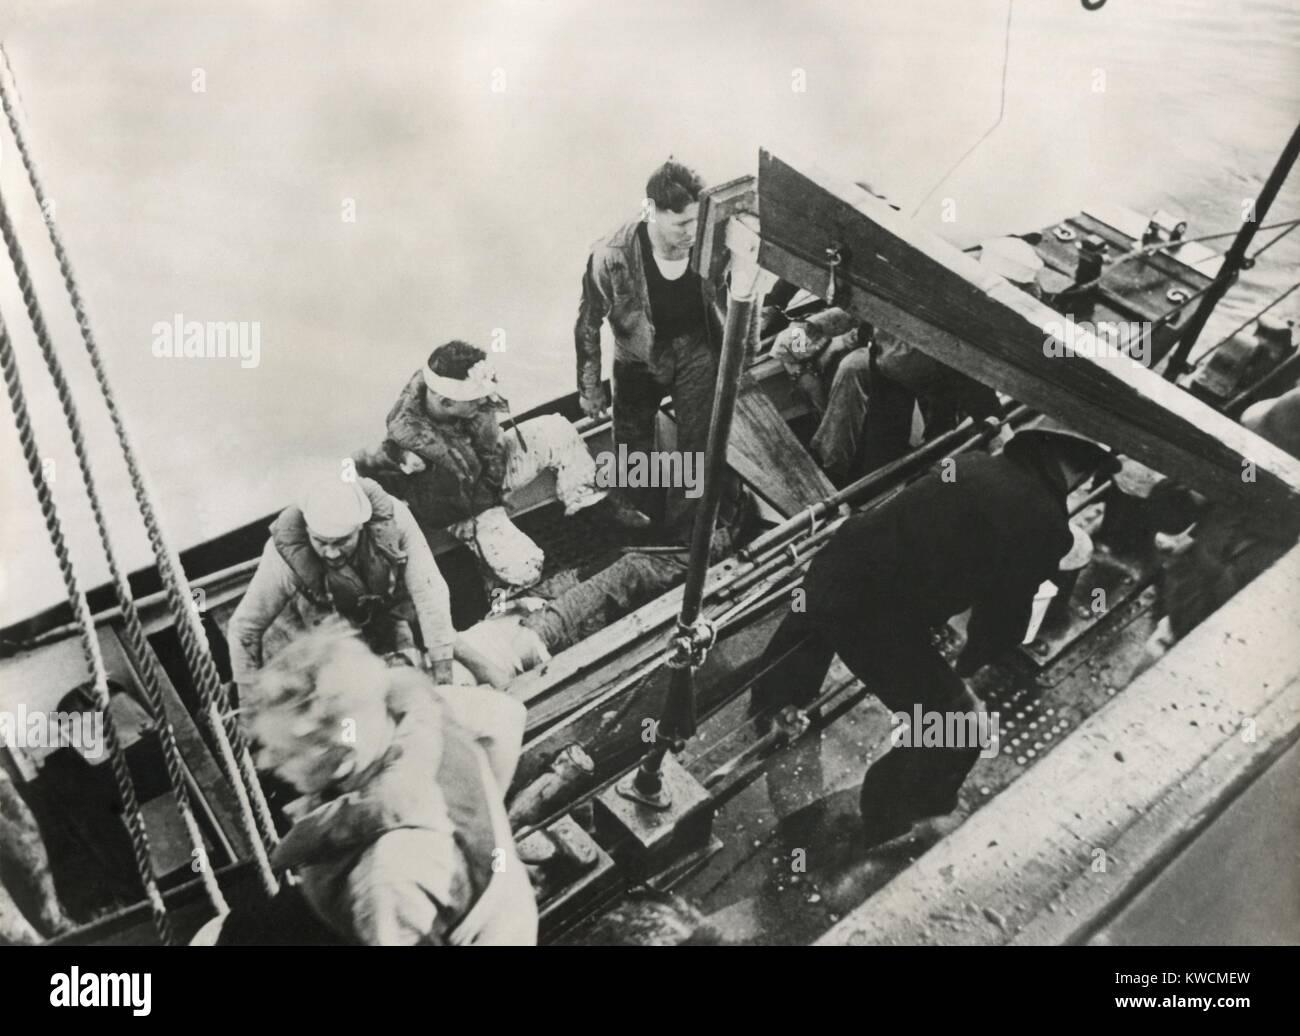 Wounded sailors of the gunboat USS Panay, Dec. 12, 1937. They were attacked by Japanese aircraft while anchored in the Yangtze River outside Nanjing. The Panay and three oil tankers were damaged and 3 sailors were killed - (BSLOC 2014 15 156) Stock Photo